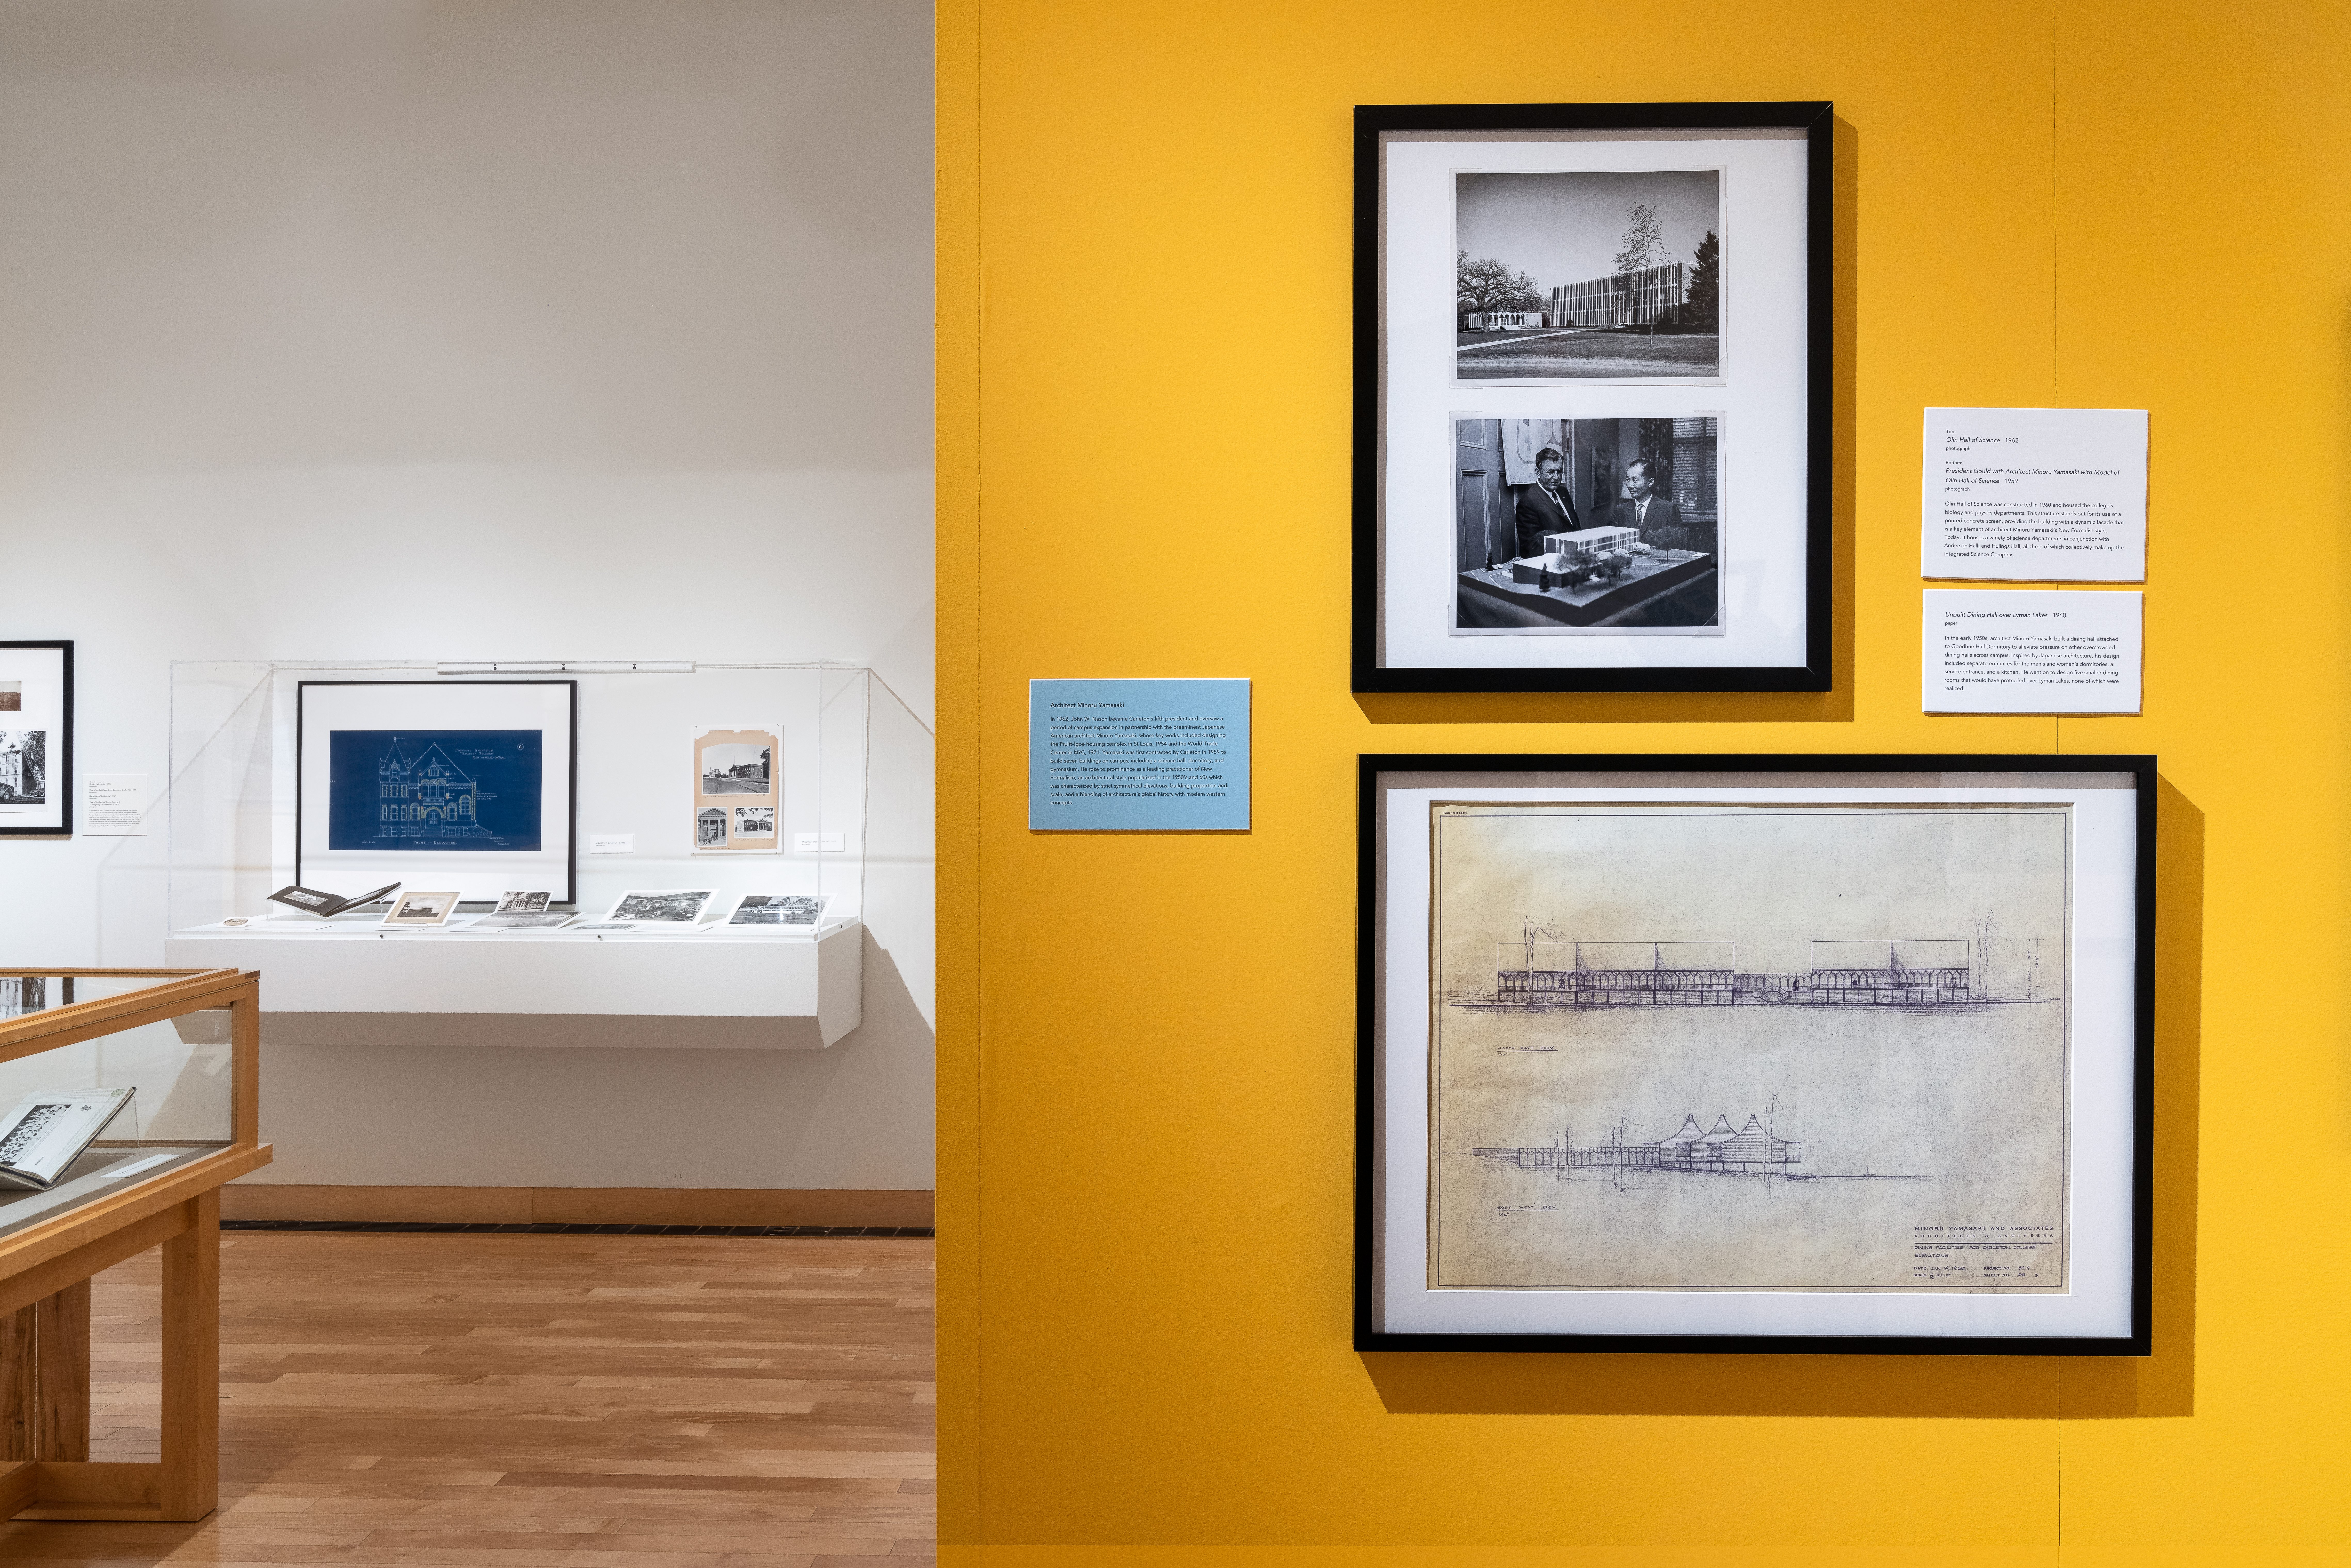 Detail of images of architect Minoru Yamasaki’s work on central wall in front of other objects and pictures on the back wall